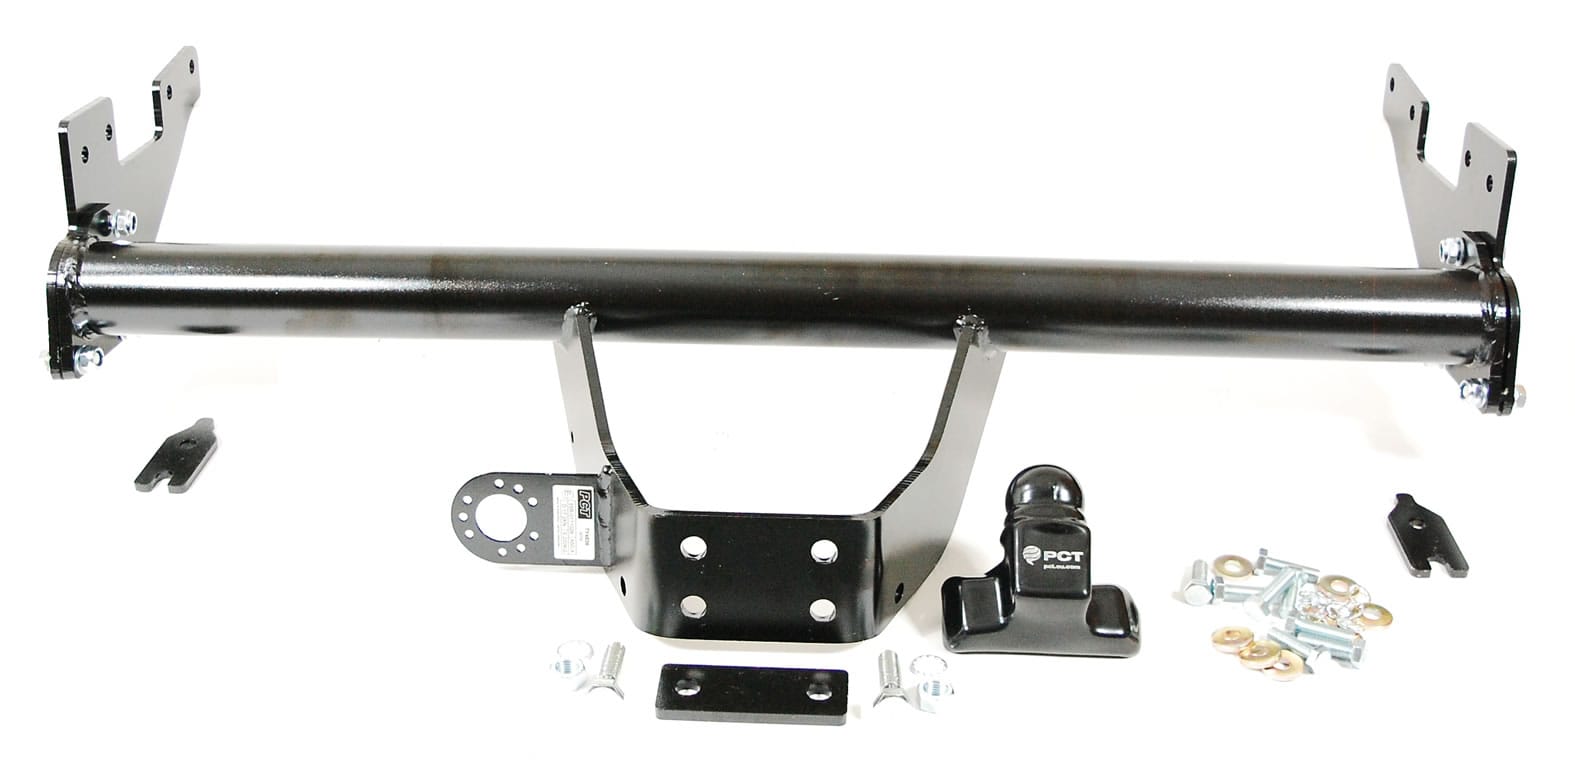 PCT Towbar  Hilux Pickup 2016-ON - compatible upto